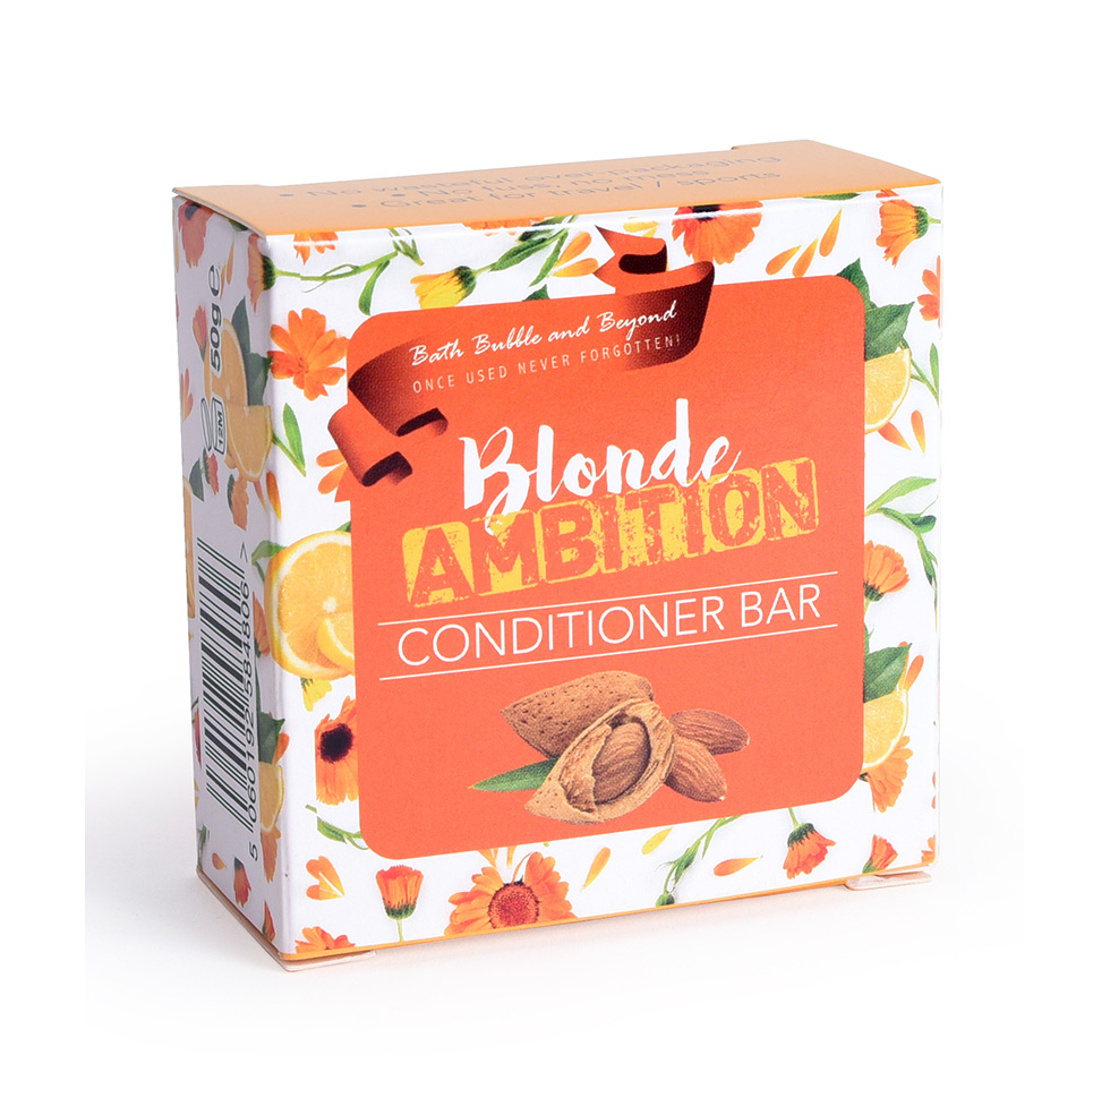 Bath Bubble and Beyond Blonde Ambition Conditioner Bar